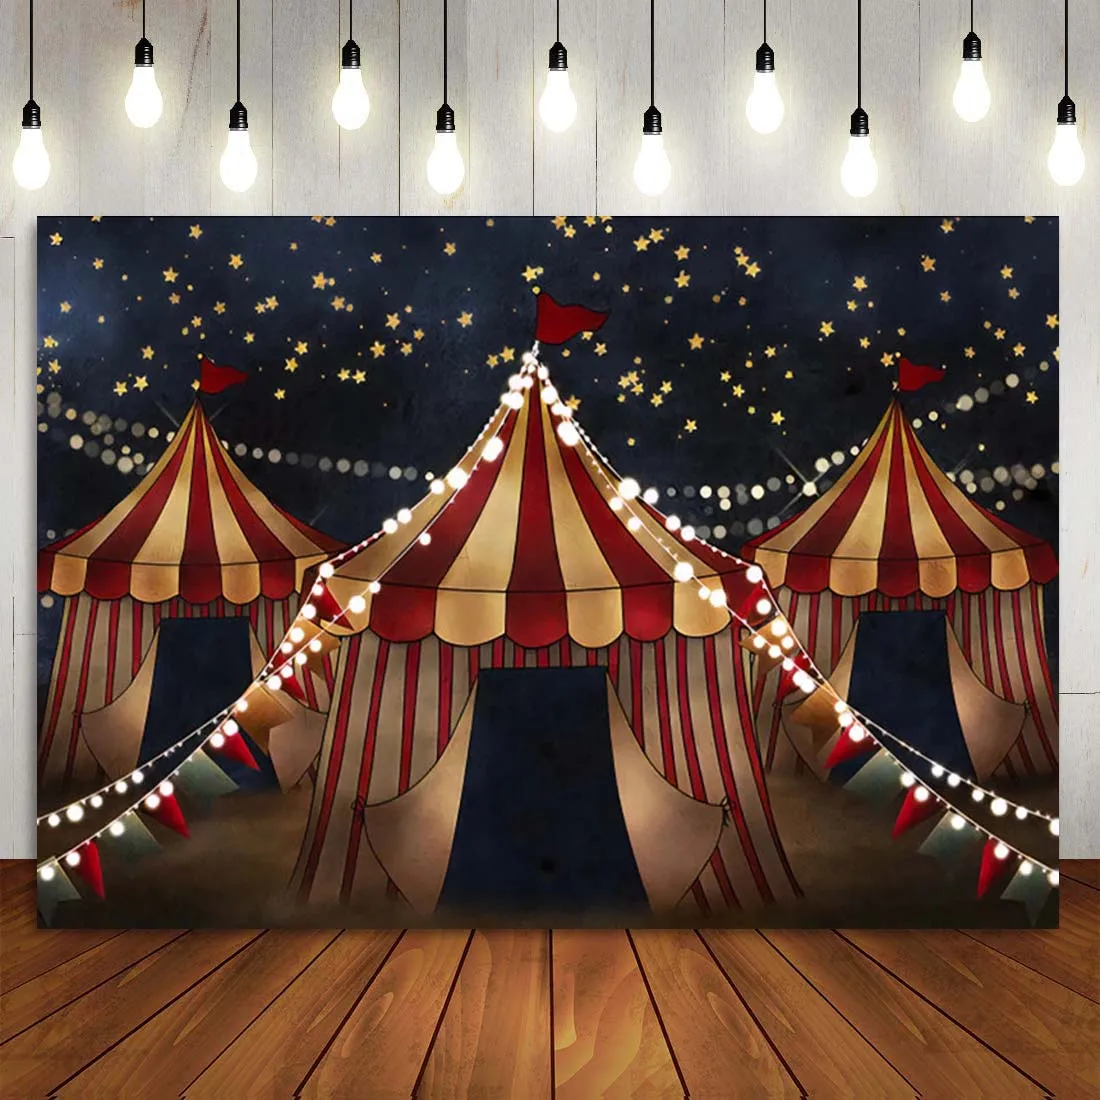 

Circus Theme Clown Play Show Red Curtain Baby Child Photography Backdrop Ferris Wheel Neon Lights Party Banner Background Photo